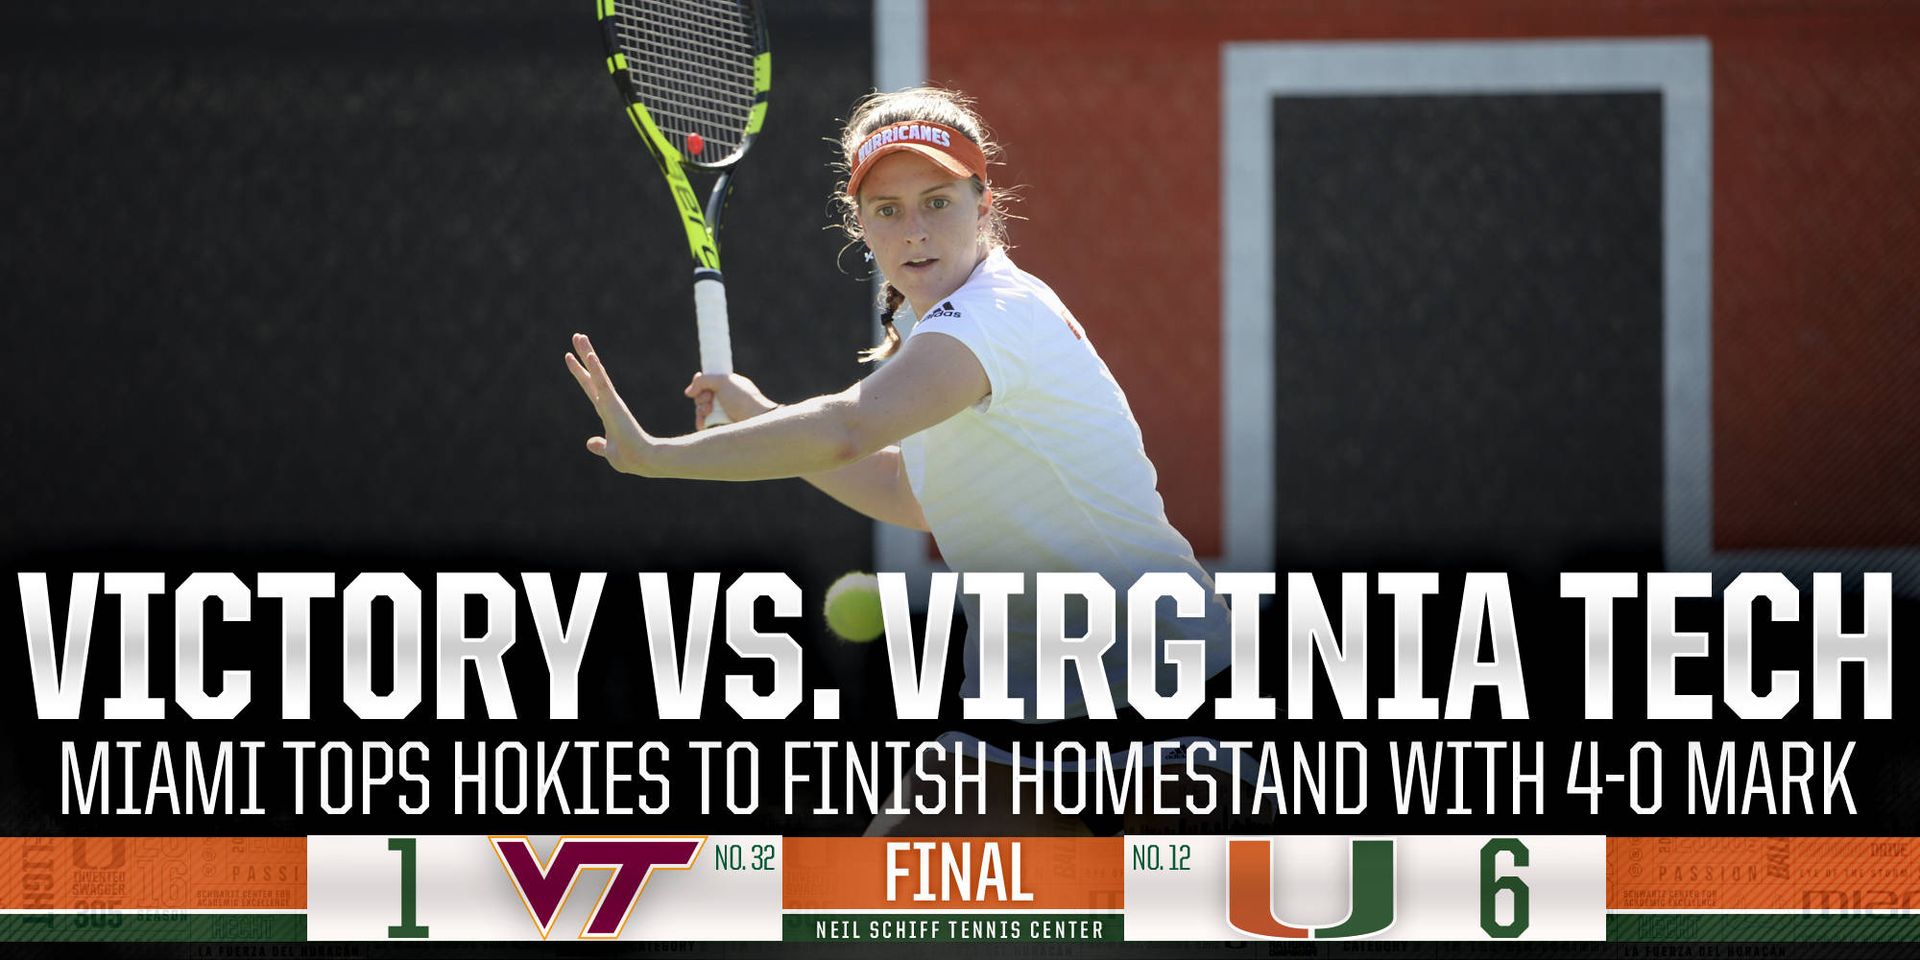 @CanesWTennis Caps Homestand by Defeating VT, 6-1